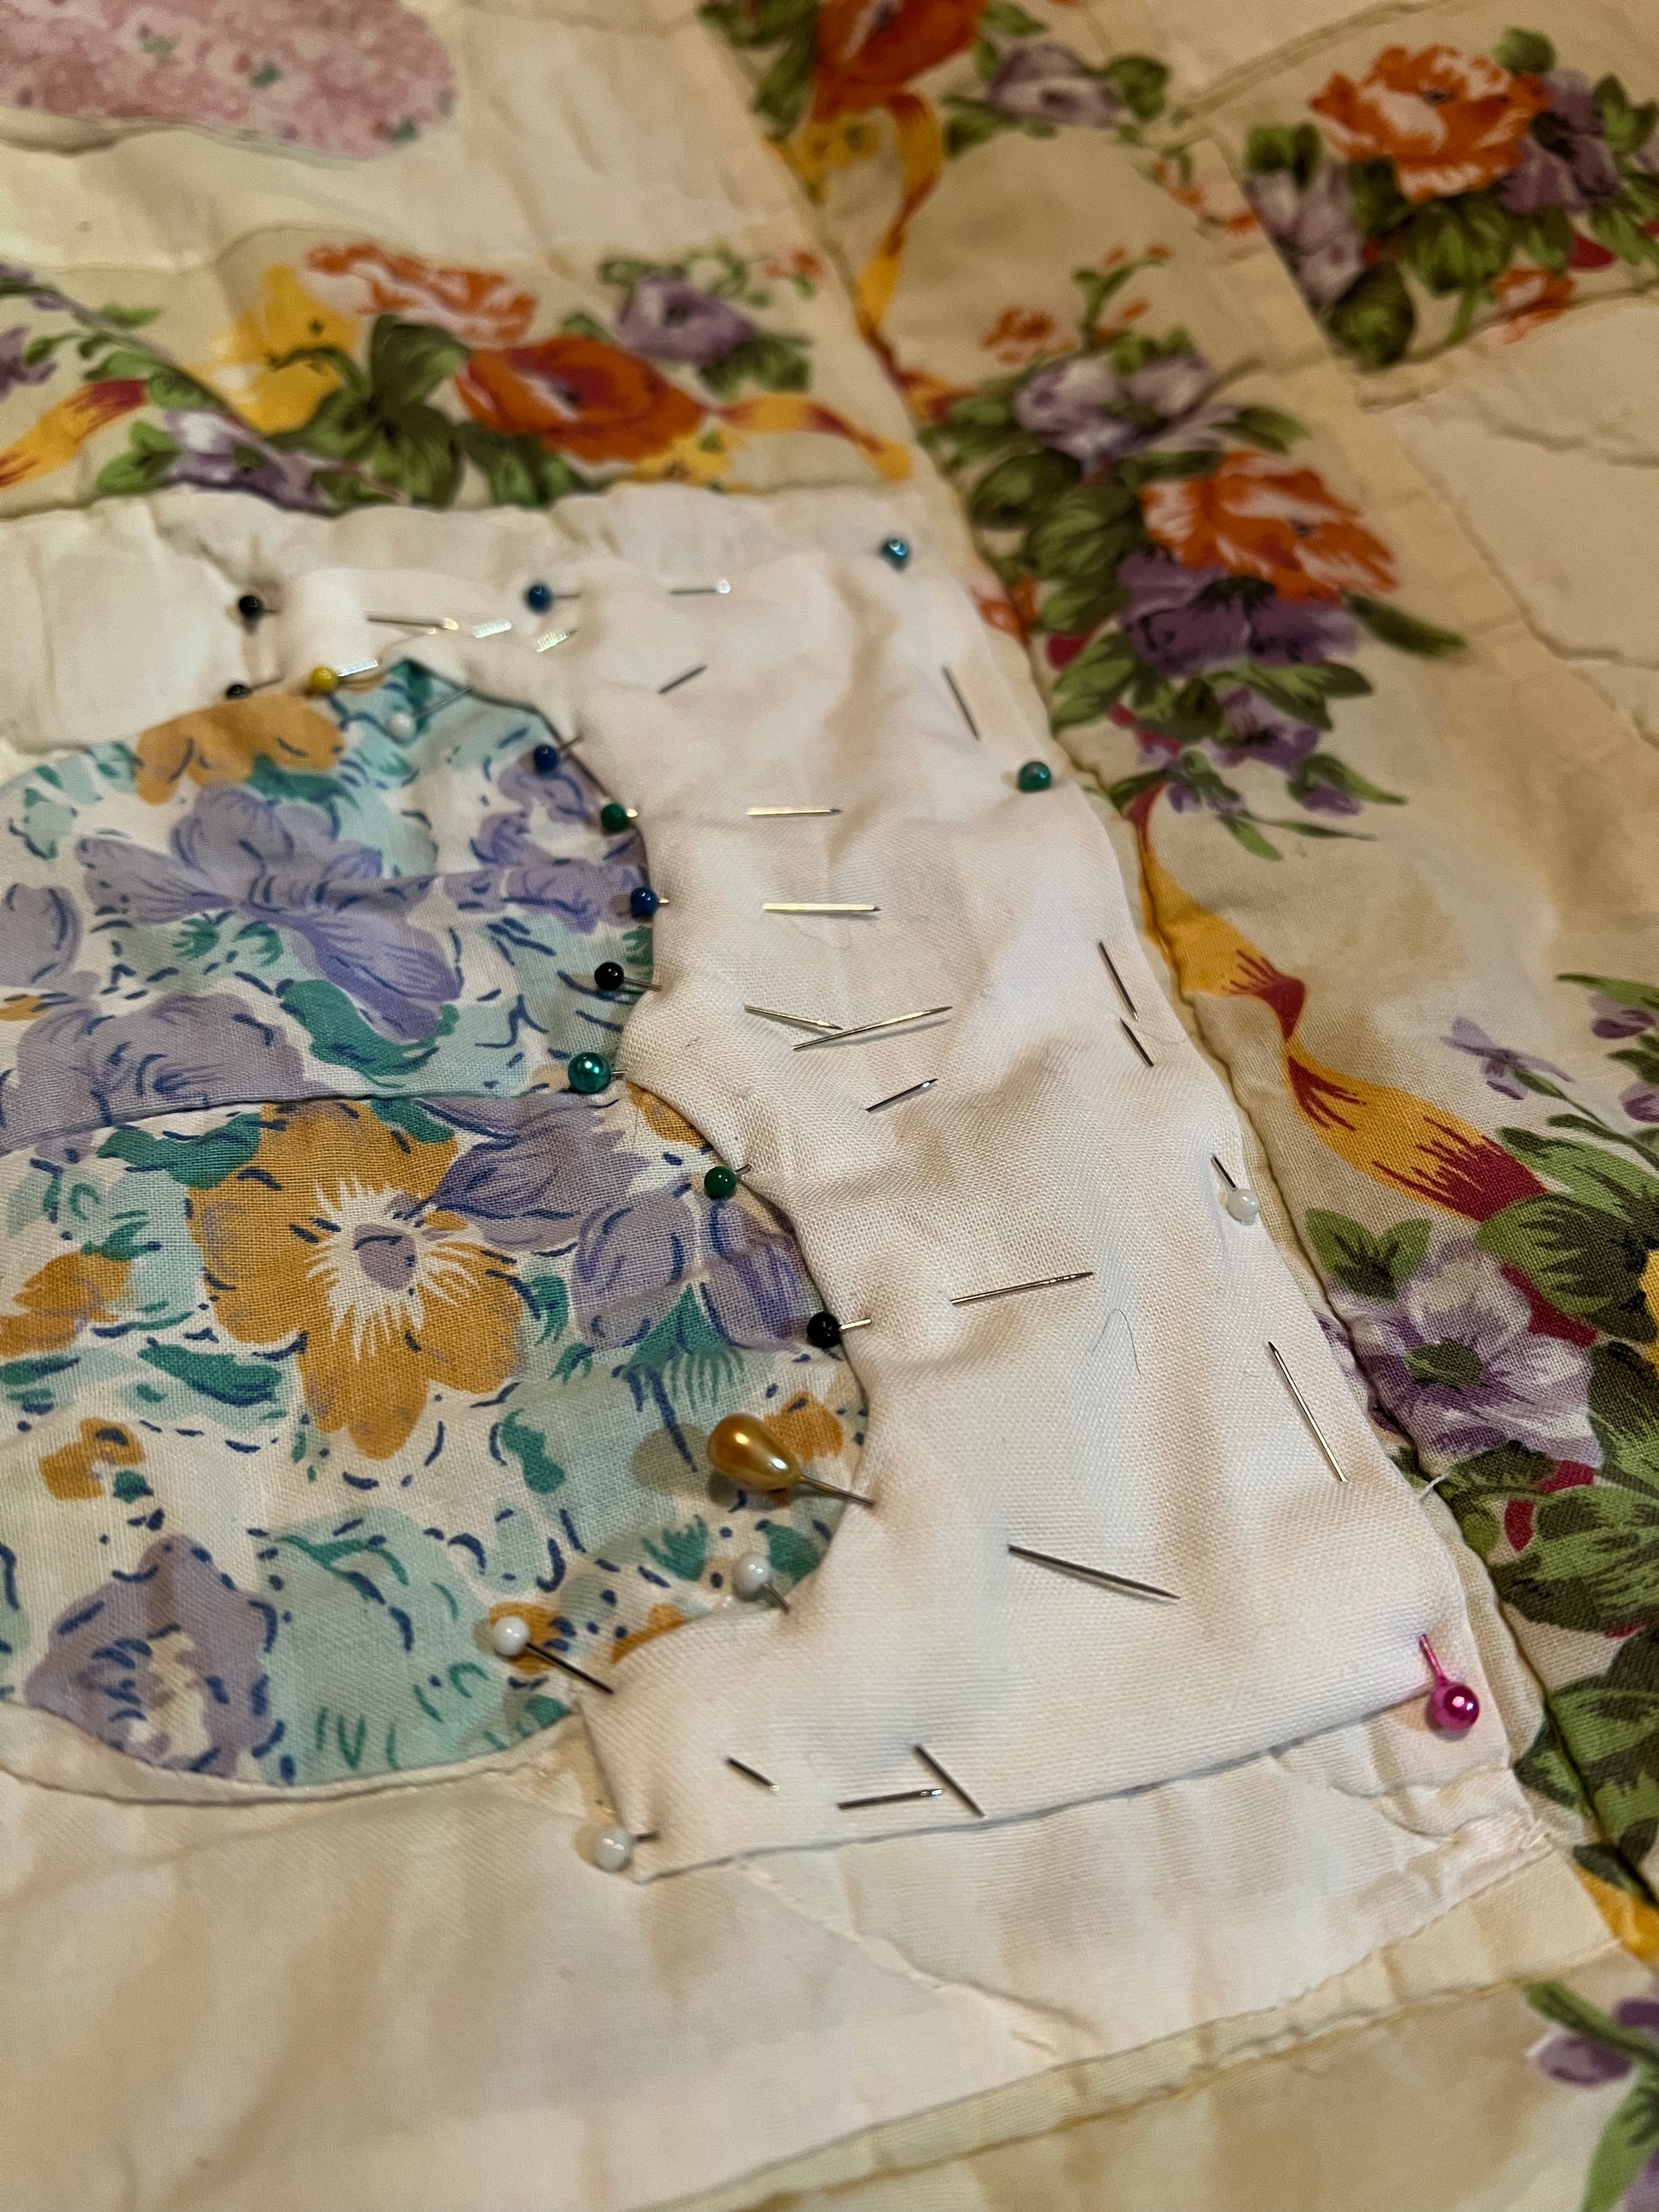 work in progress of the applique of white over the stained portion of quilt, various pins holding appliqué in place